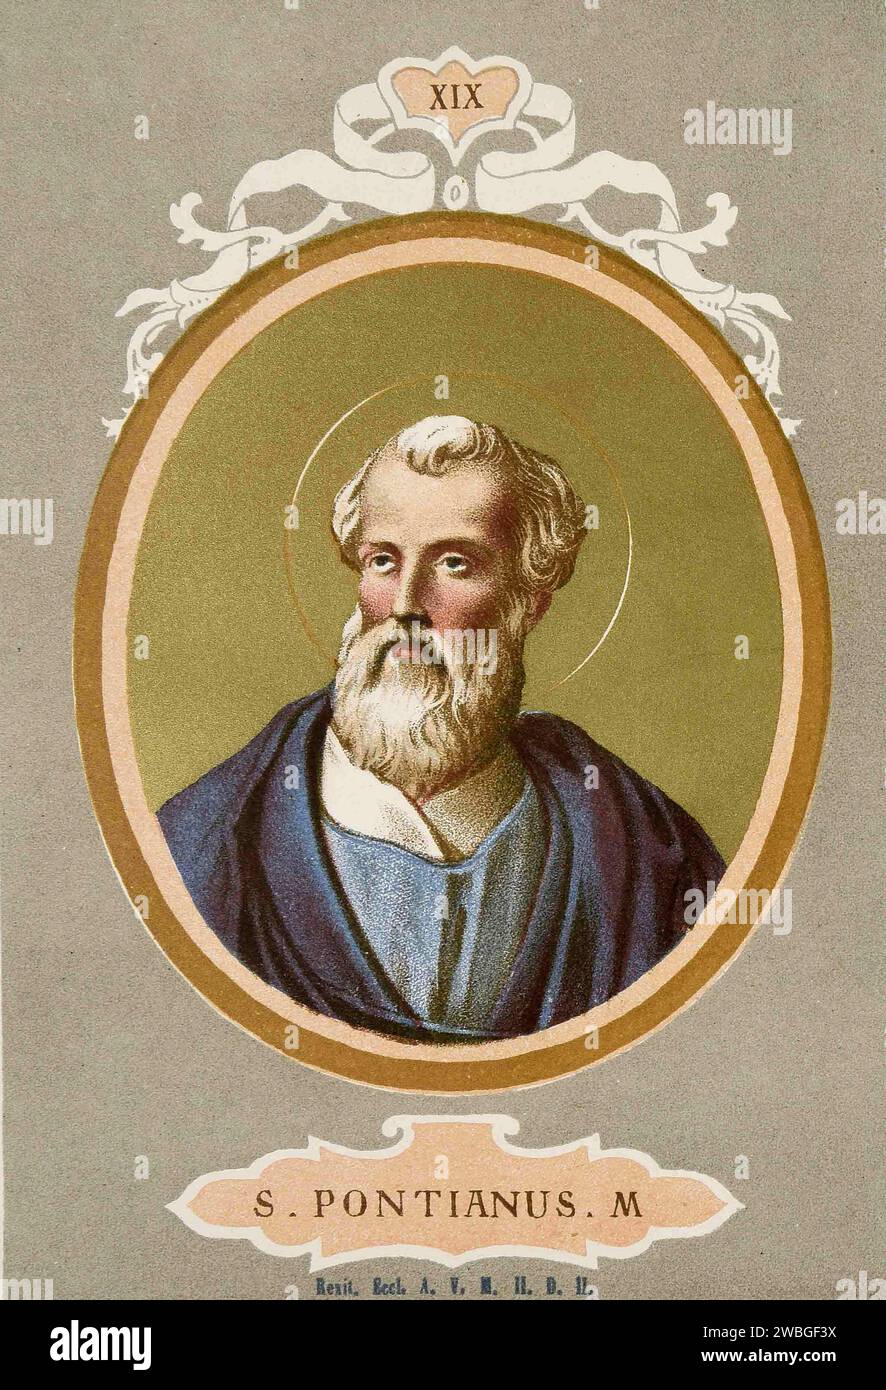 An 1879 engraving of Pope Pontian who was pontiff from AD230 to AD235. He was the eighteenth pope and is the first to have the exact dates of his period in office recorded. He was exiled to Sardinia where he was beaten to death. Before his death he abdicated, allowing the orderly election of a successor. This abdication ended the schism between the papal office and the opposition antipope Hippolytus, who was also exiled to and died on Sardinia. Stock Photo